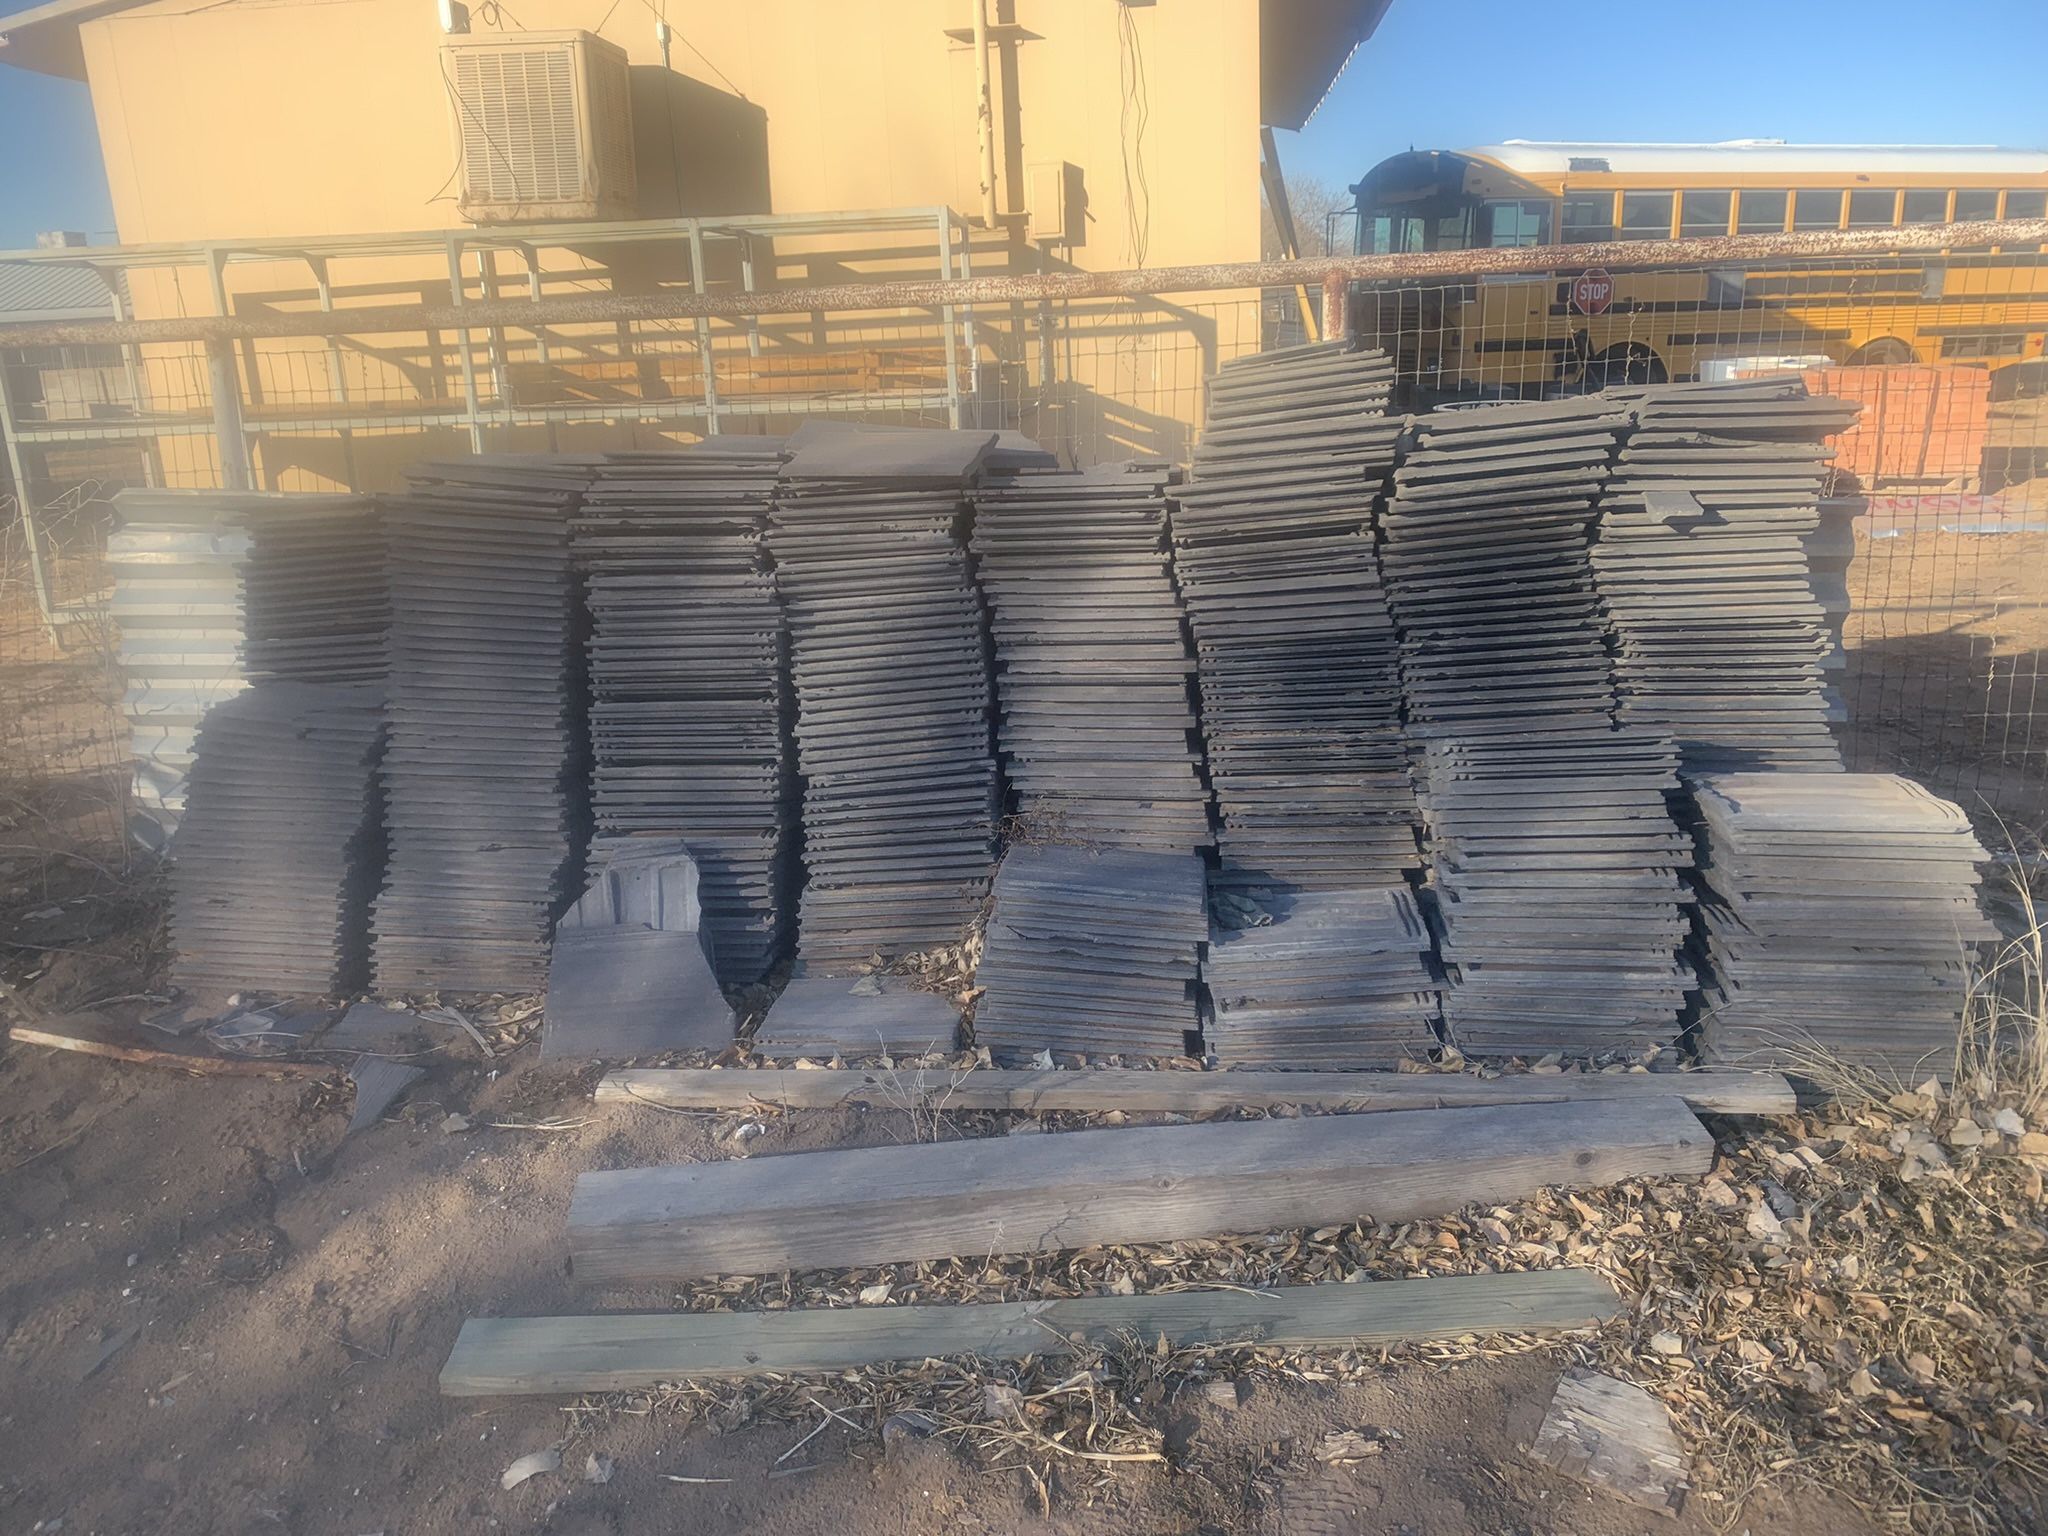 700 (give or take) Monier roof tiles